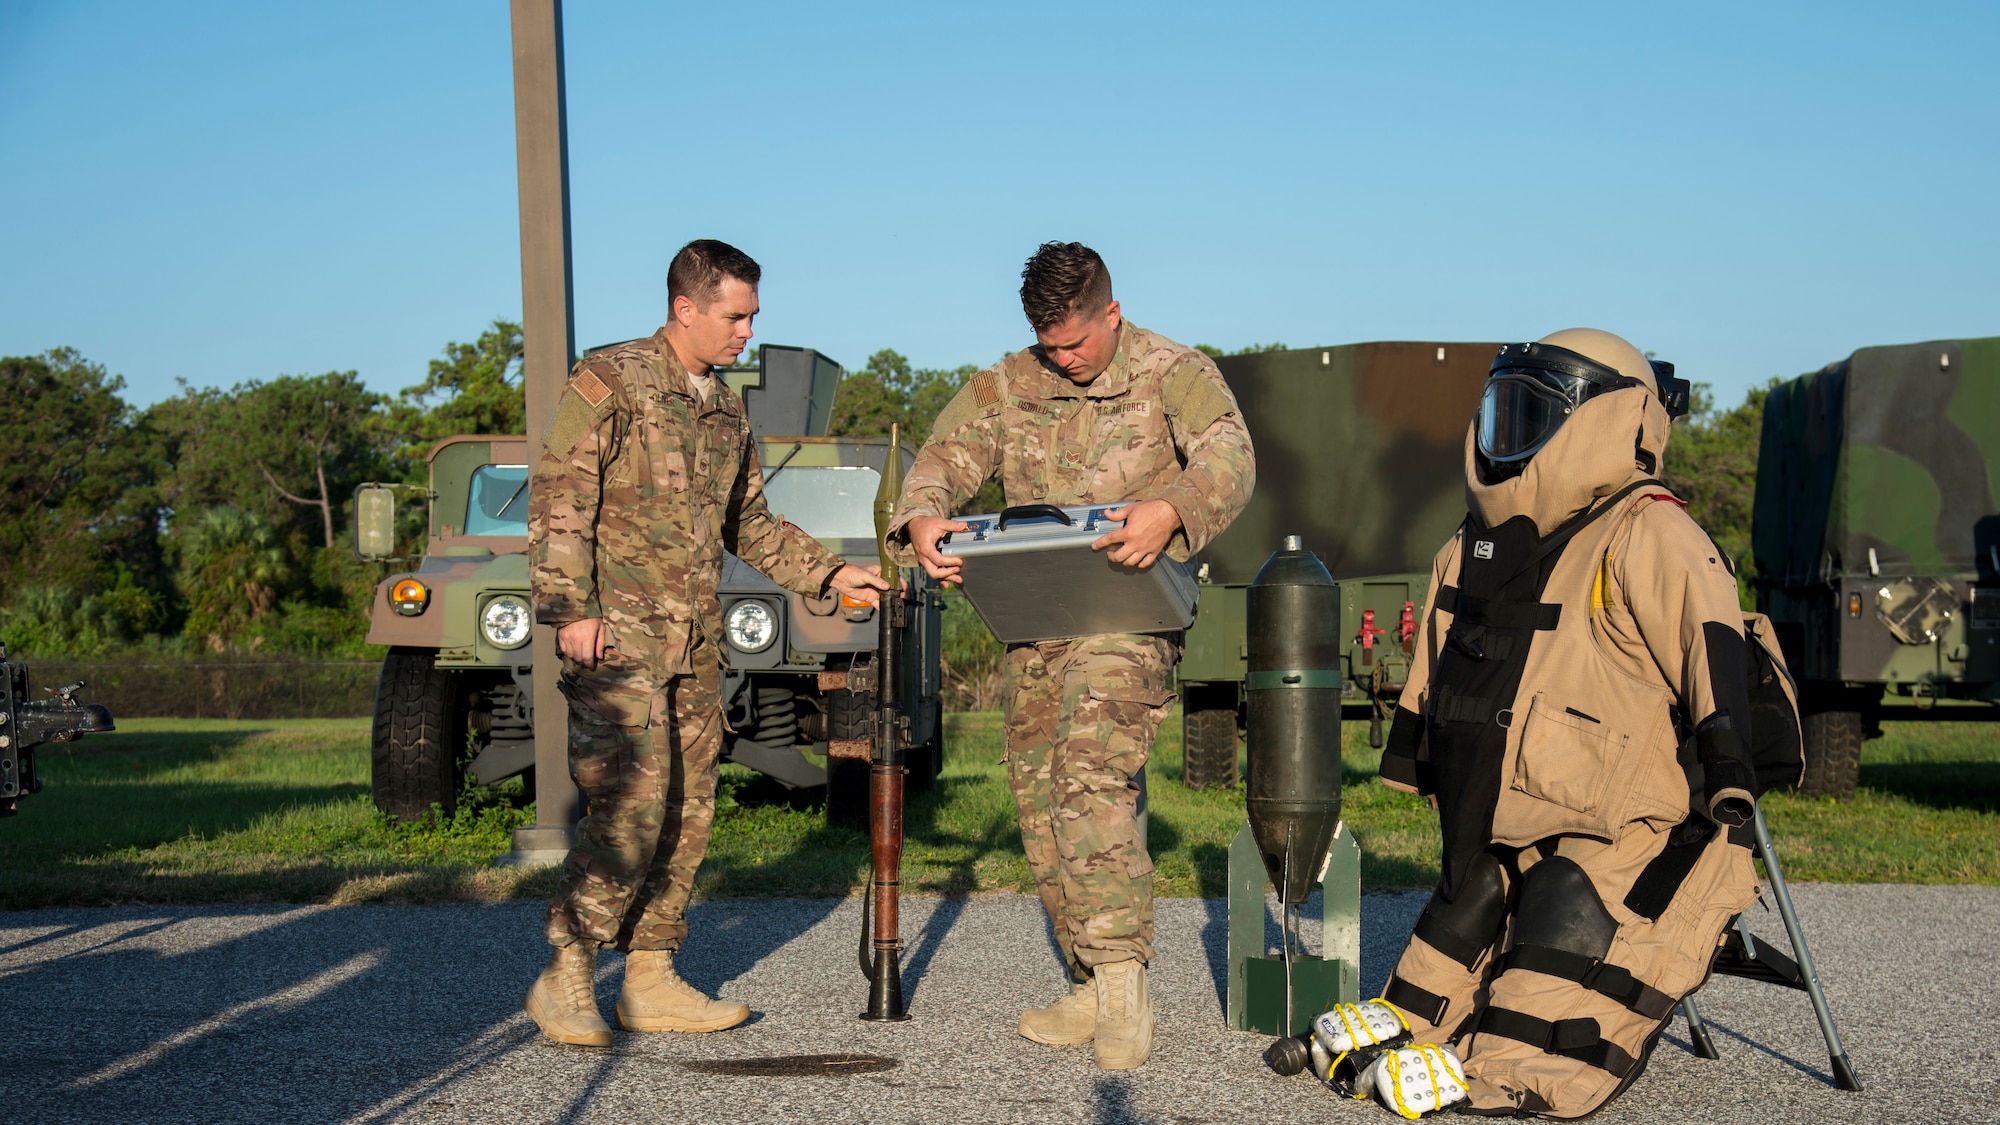 U.S. Air Force Master Sgt. Ryan Oliver, the 6th Civil Engineer Squadron Explosive Ordnance Disposal Flight section chief, and Staff Sgt. Jordan Oswald, a 6th CES/ EOD technician, set up a visual aid display, Sept. 11, 2019, at MacDill Air Force Base, Fla.  The 6th EOD Flight hosted an annual explosives training for local Transportation Security Administration officers at MacDill. (U.S. Air Force photo by Airman 1st Class Shannon Bowman)